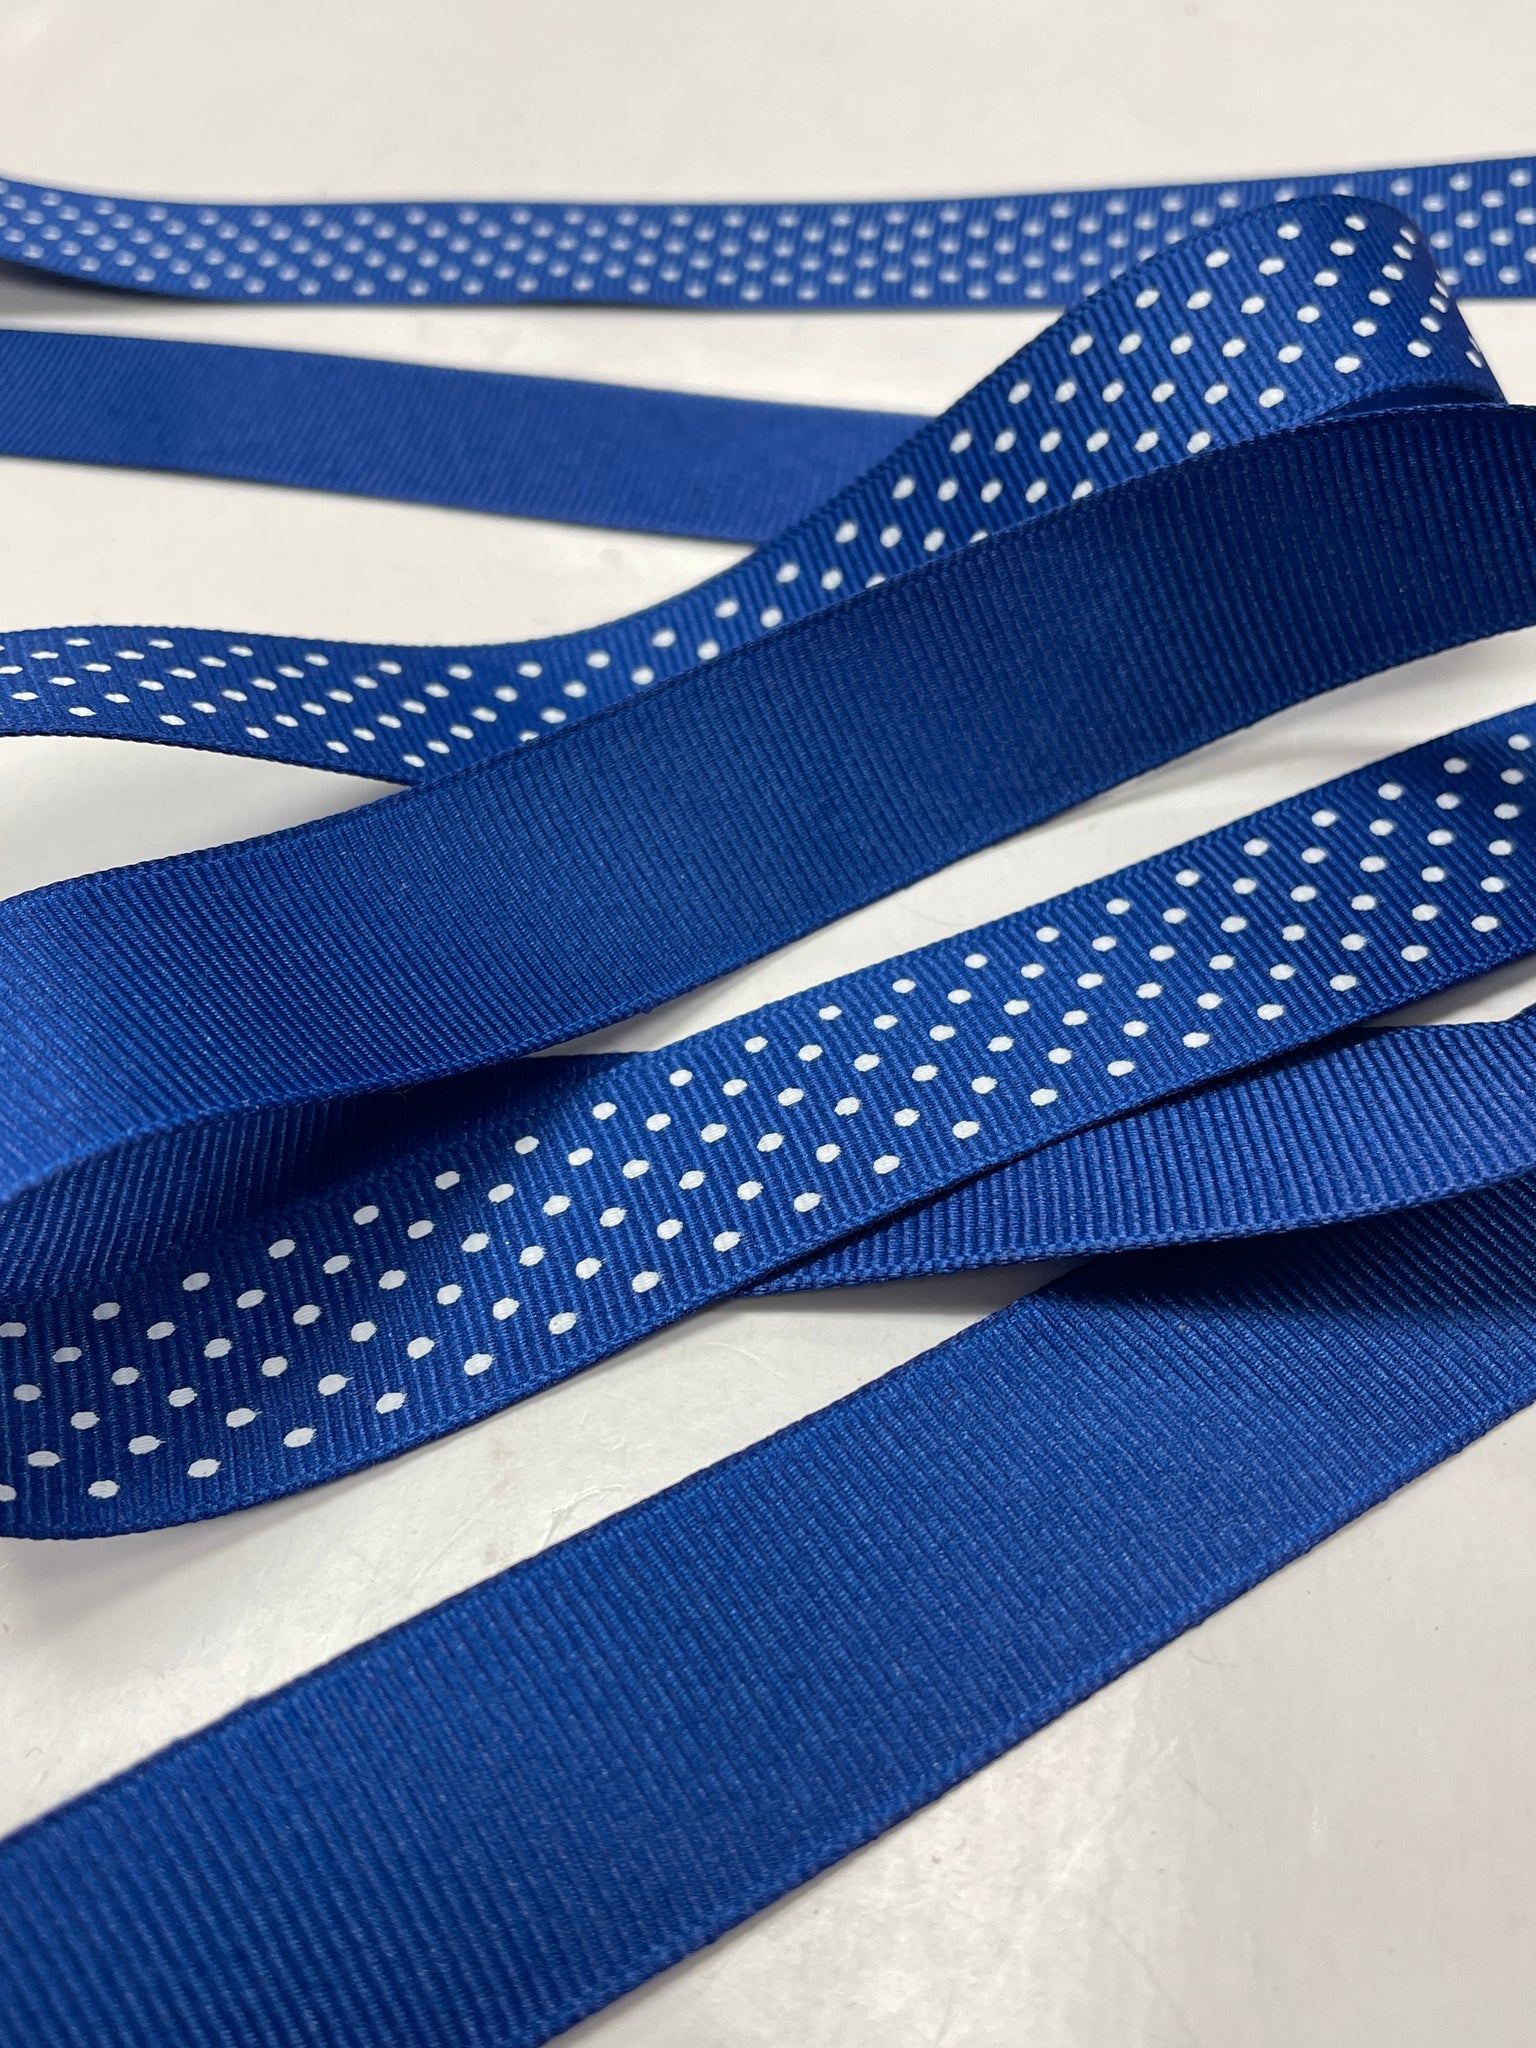 2+ YD Poly Grosgrain Ribbon - Blue with White Polka Dots